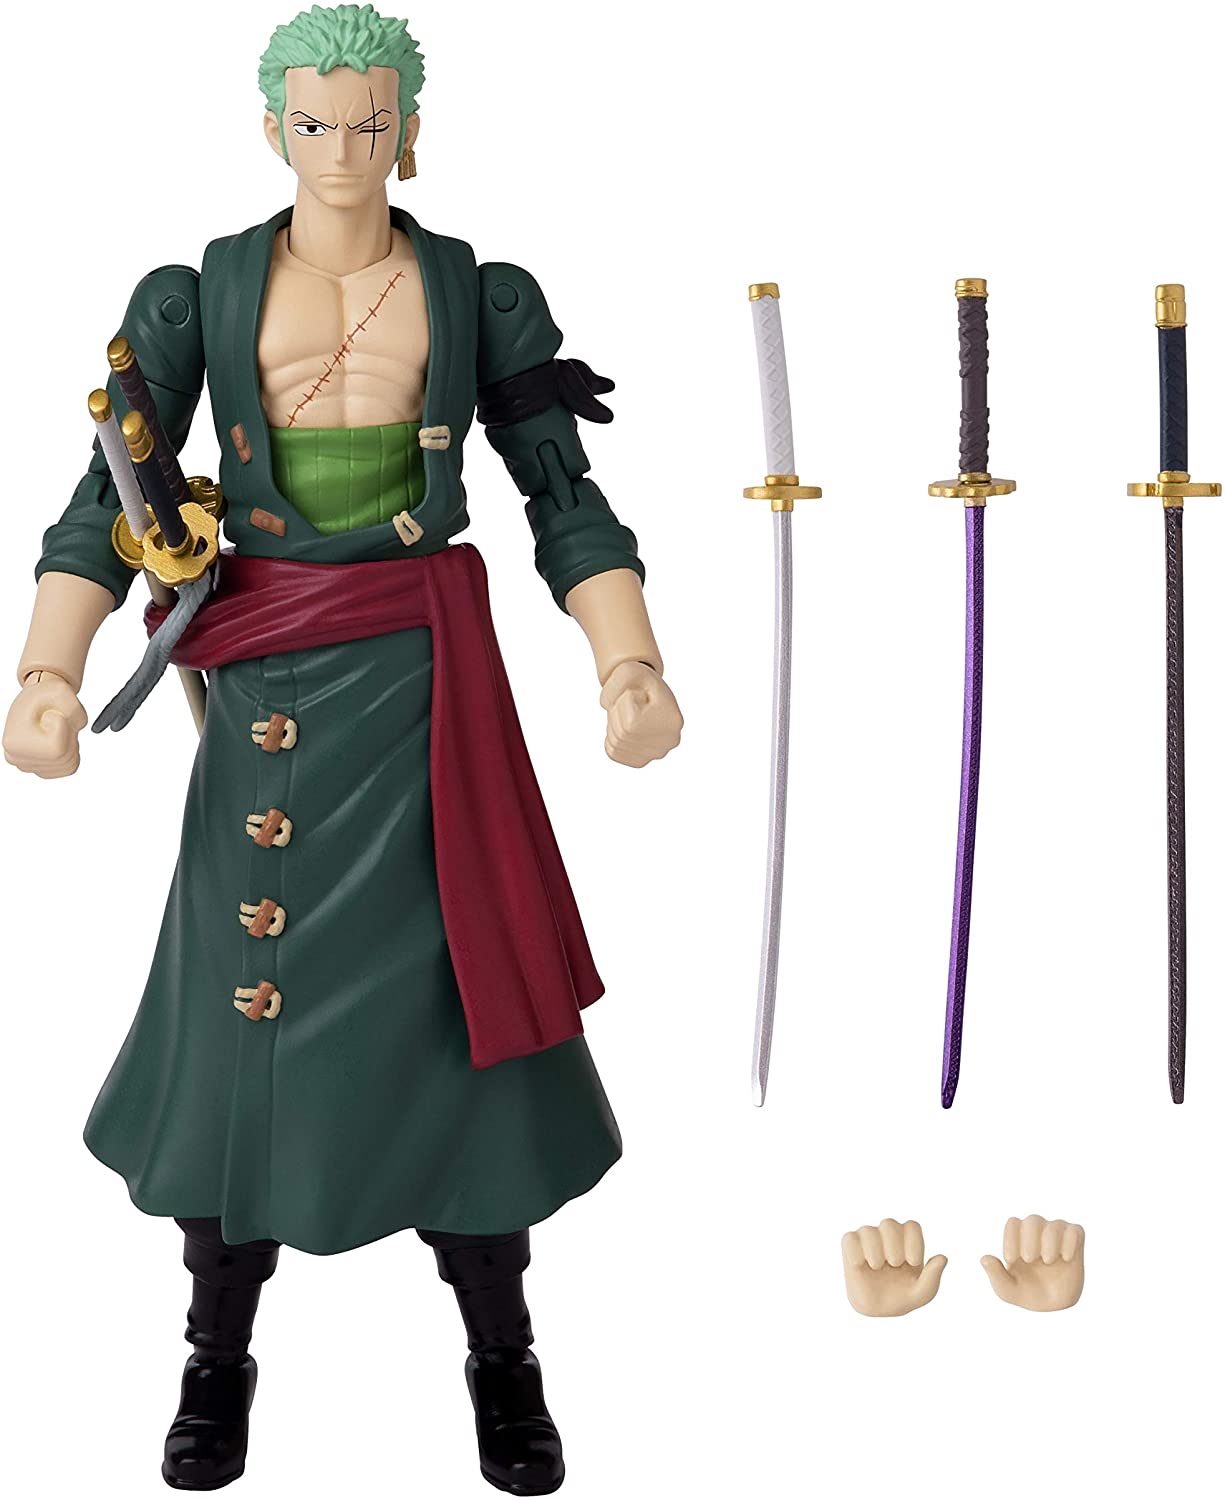 Details about   Anime Straw hat group Roronoa Zoro Battle Ver 23cm Figure Statue Toy in Box 